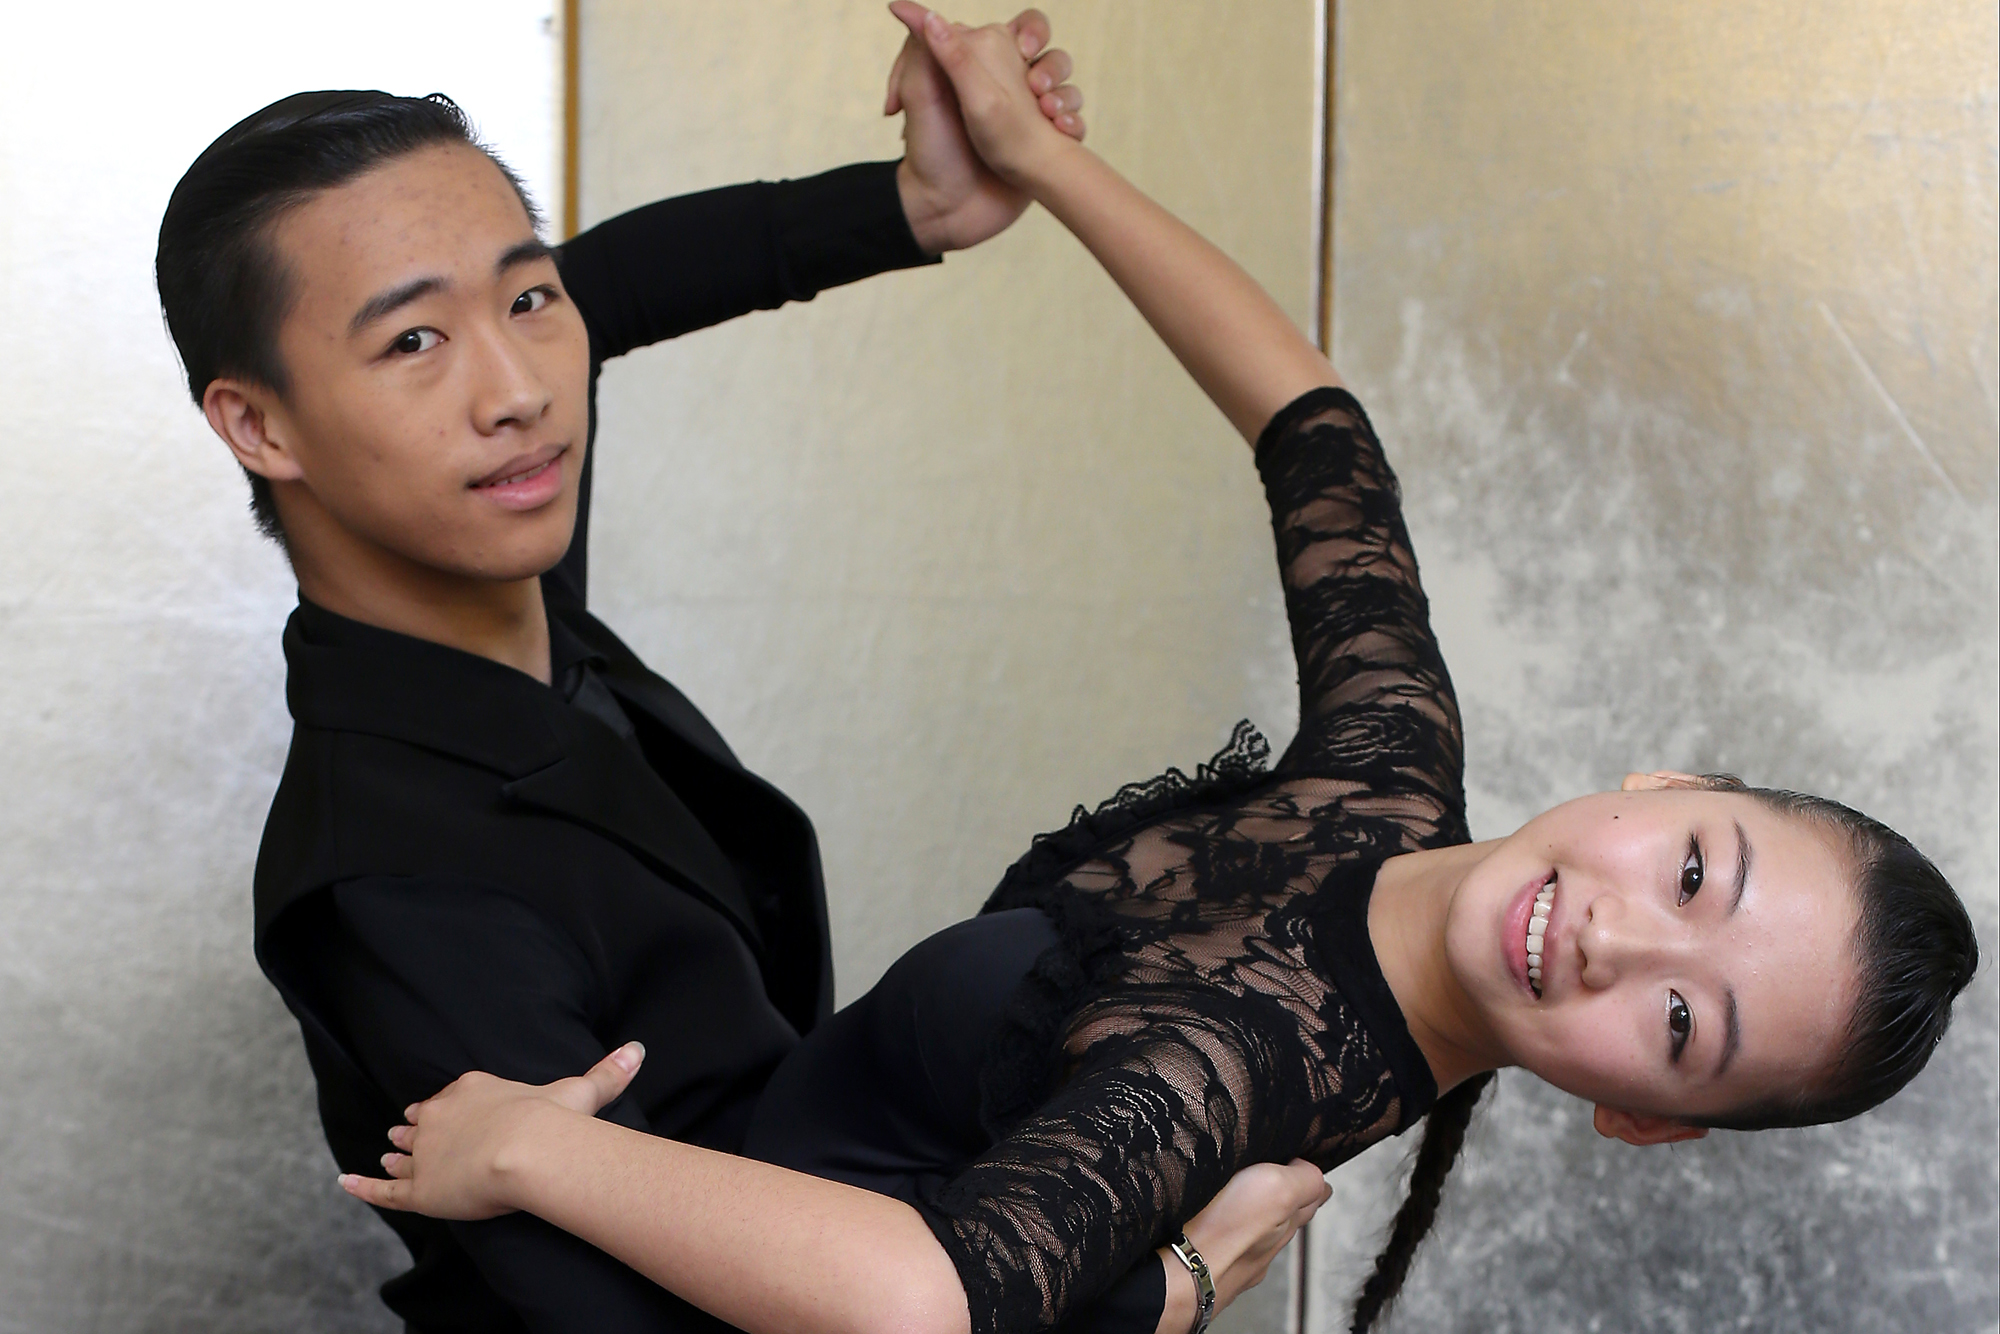 Brother and sister make sacrifices to balance school and competing in DanceSport